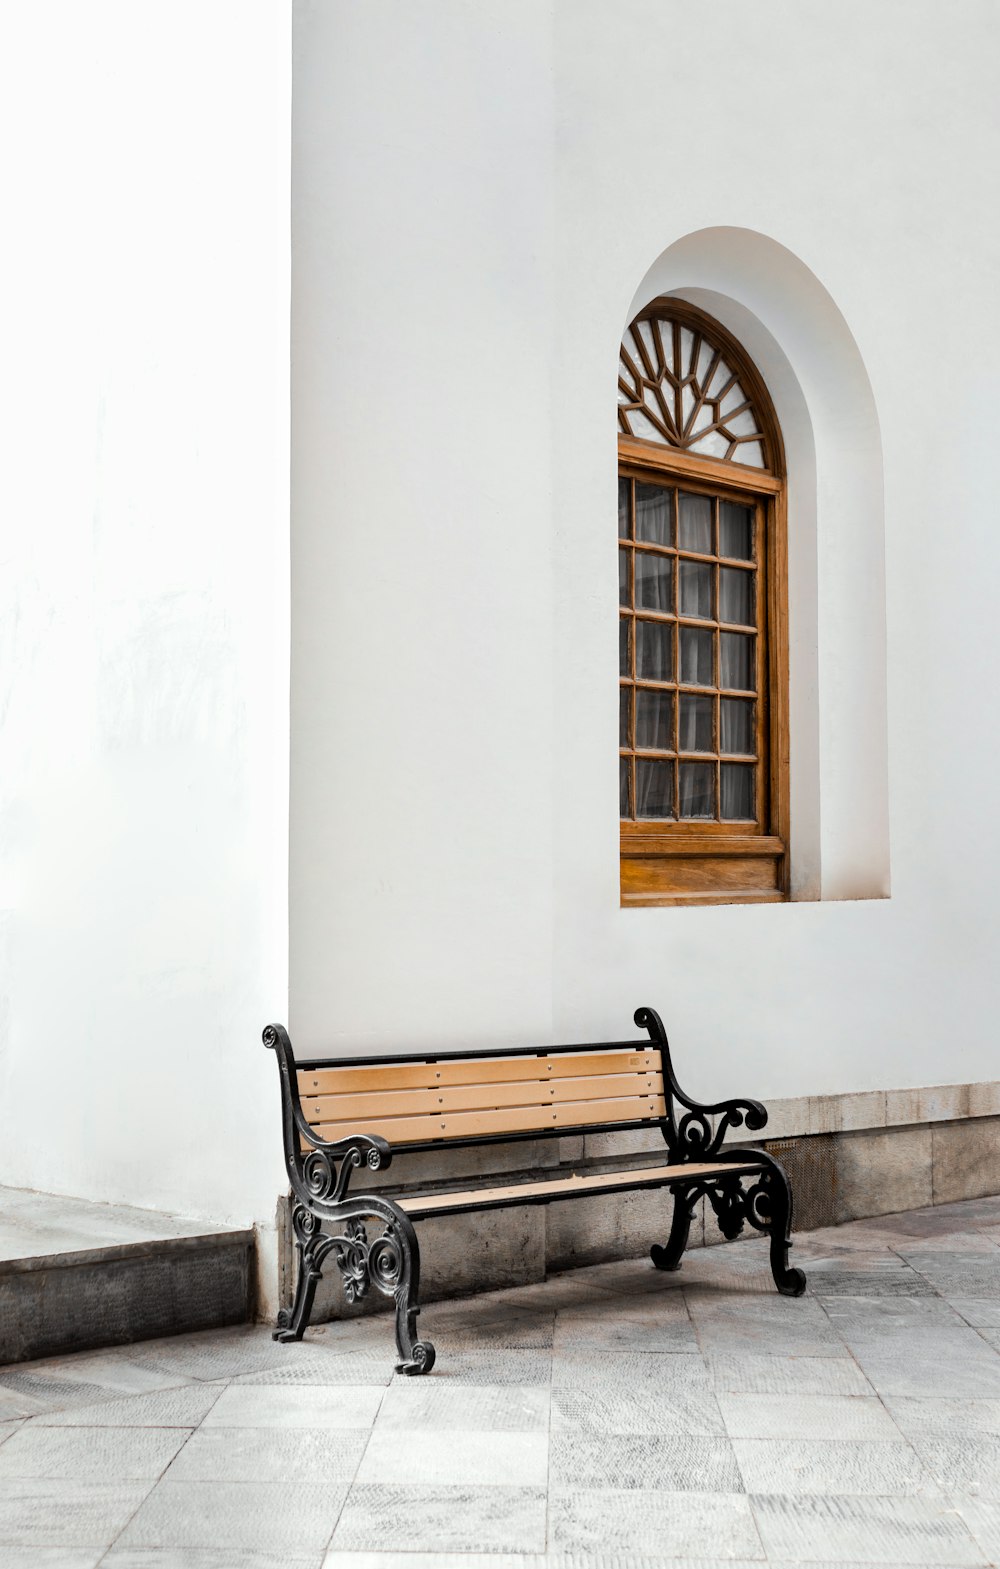 a wooden bench sitting in front of a window